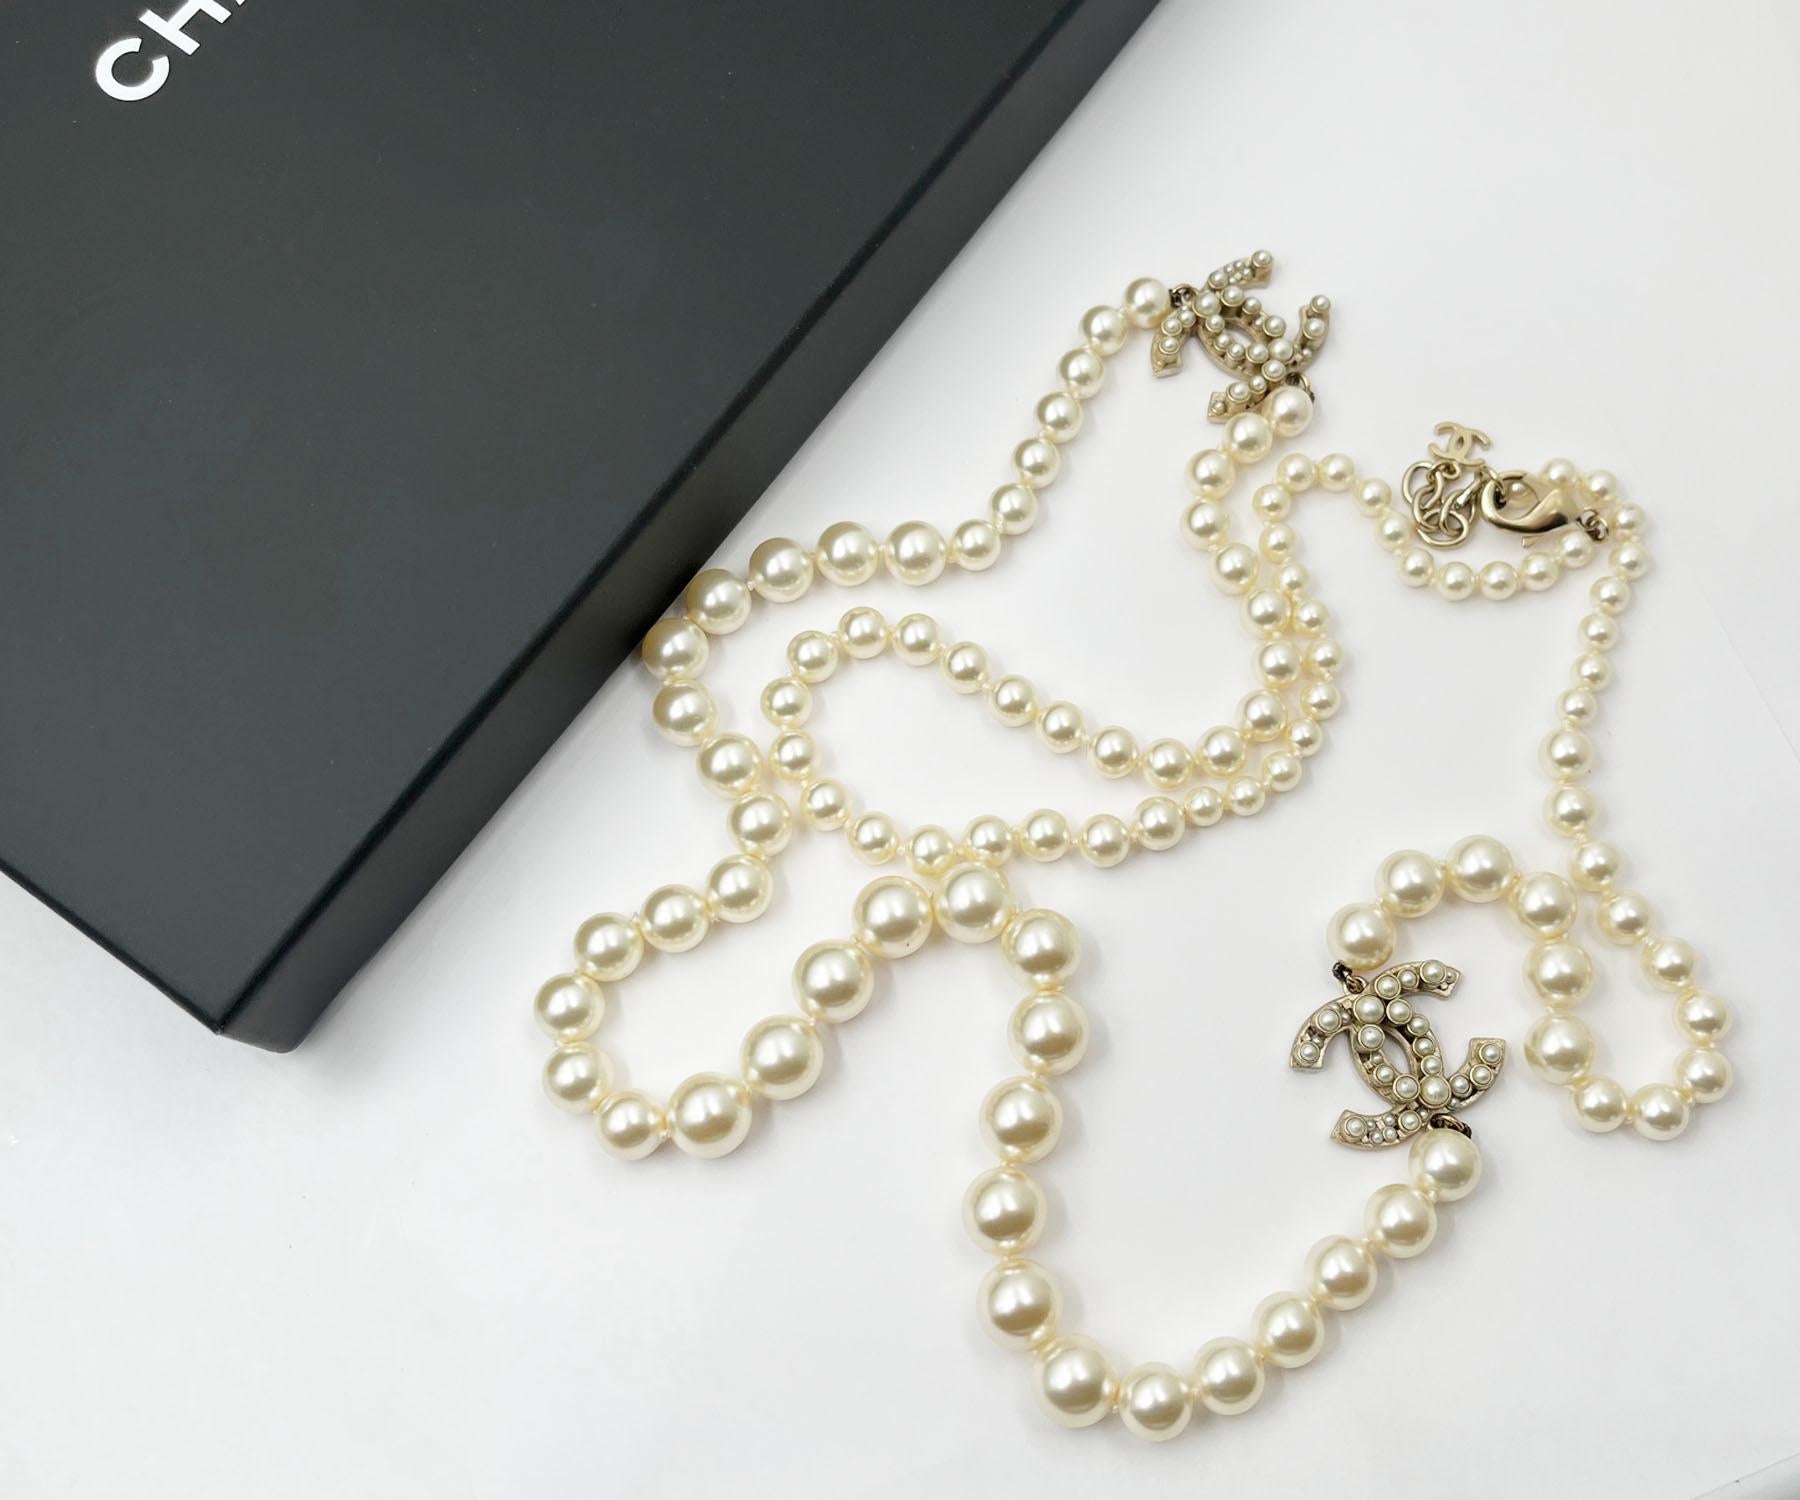 Chanel Gold Frame Bubble Pearl Pearl Necklace

* Marked 14
* Made in France
*Comes with the original box and pouch

-It is approximately 42